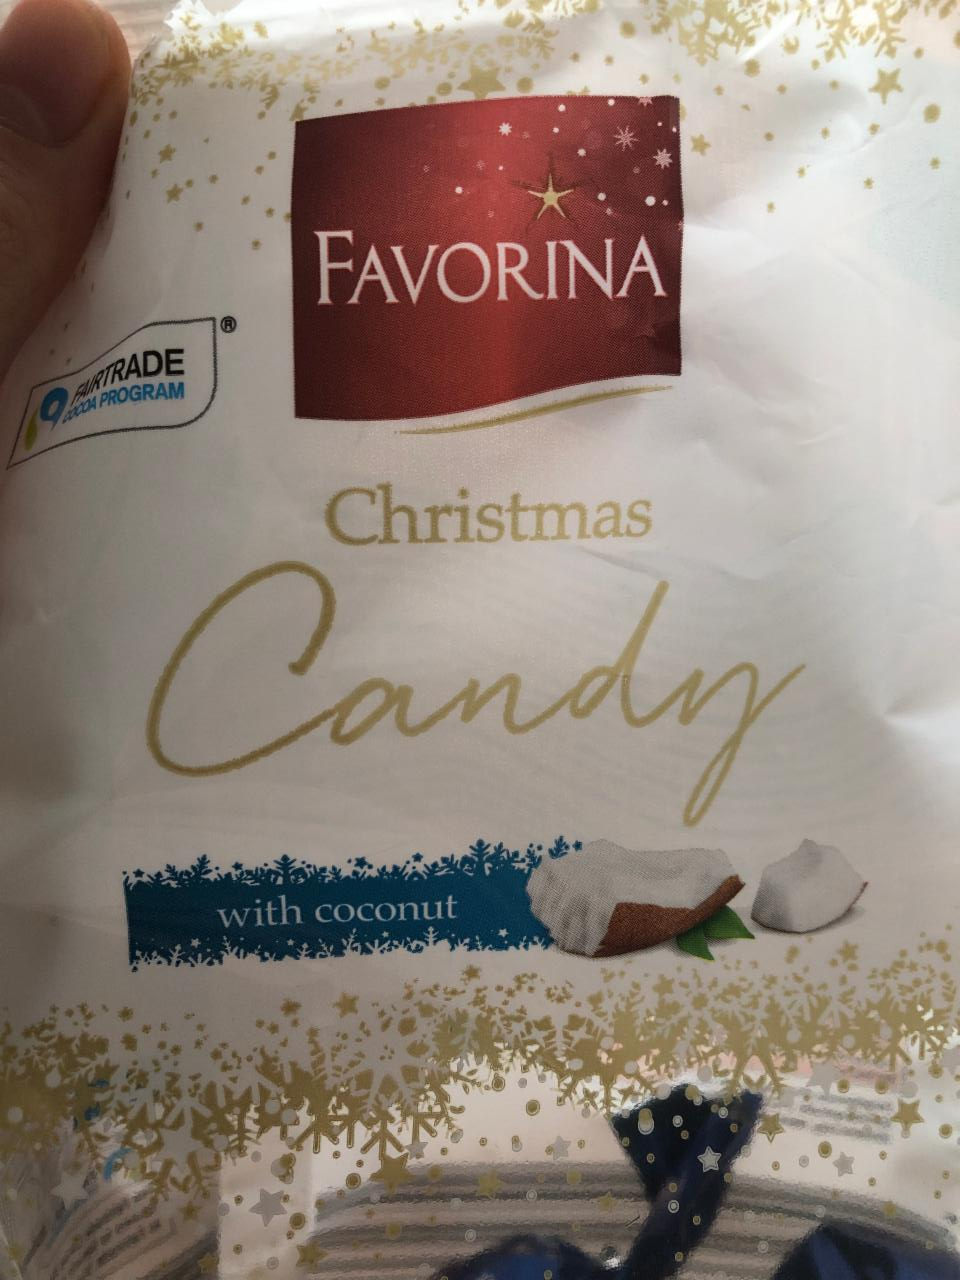 Fotografie - Christmas Candy with coconut Favorina